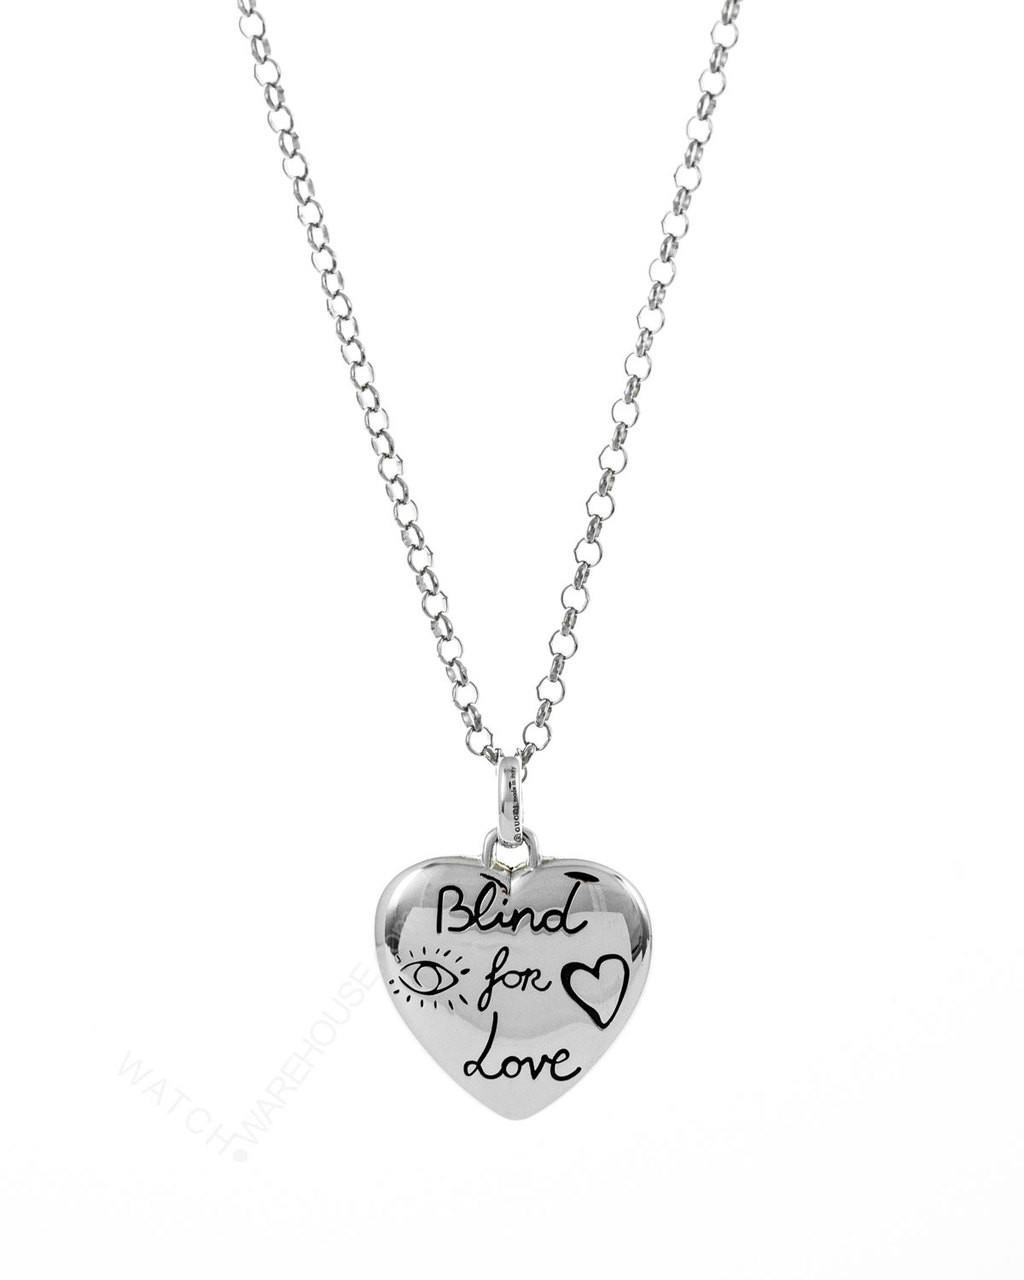 Gucci Blind For Love Heart SS Necklace YBB455542001 / YBB45554200100U | Fast & Free US Shipping | Watch